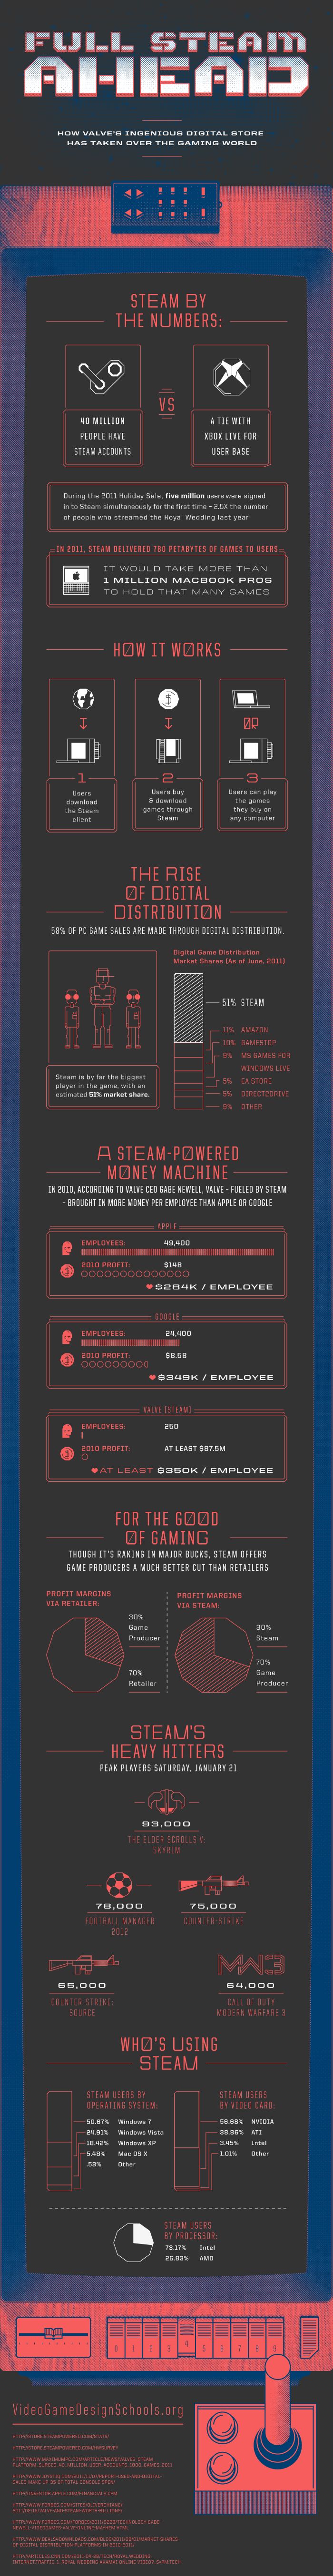 Full Steam Ahead Infographic